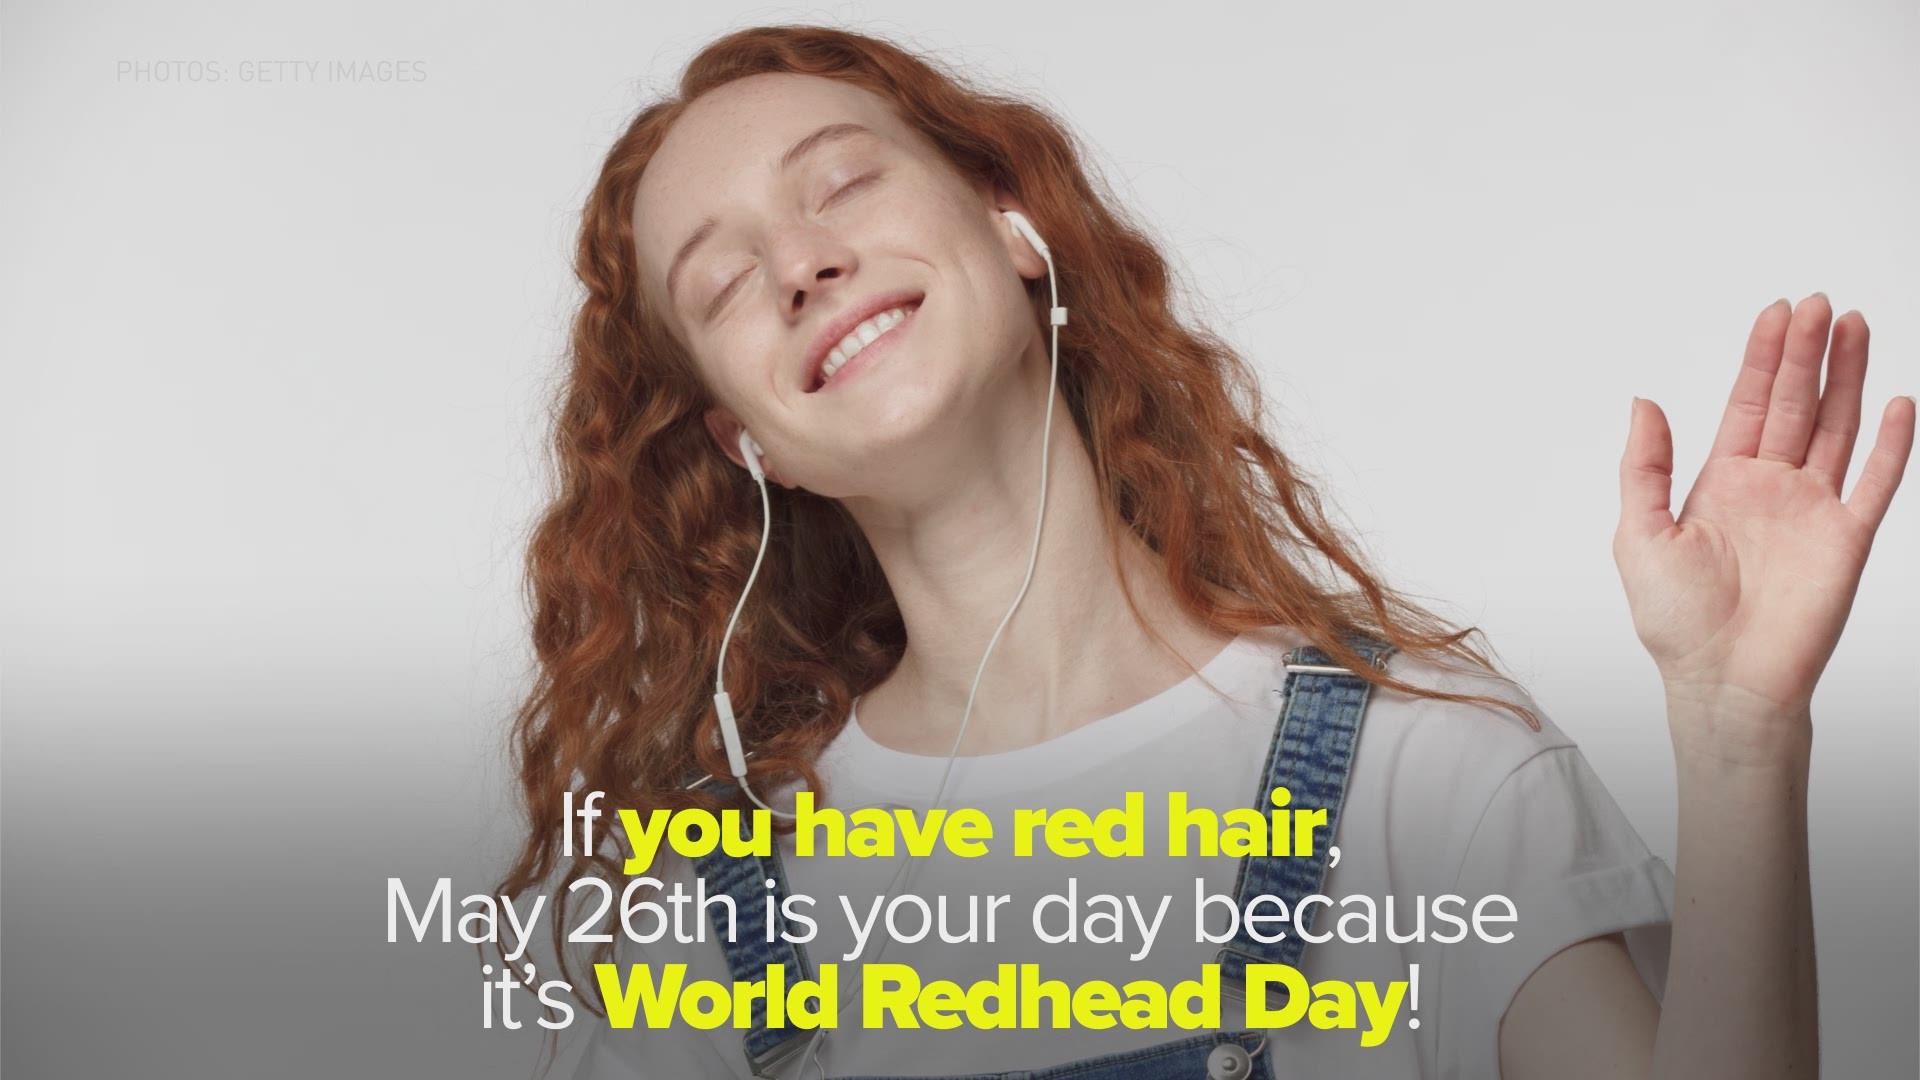 If you have red hair, May 26 is your day to celebrate because it's World Redhead Day! Here are 7 fun facts about having red hair.